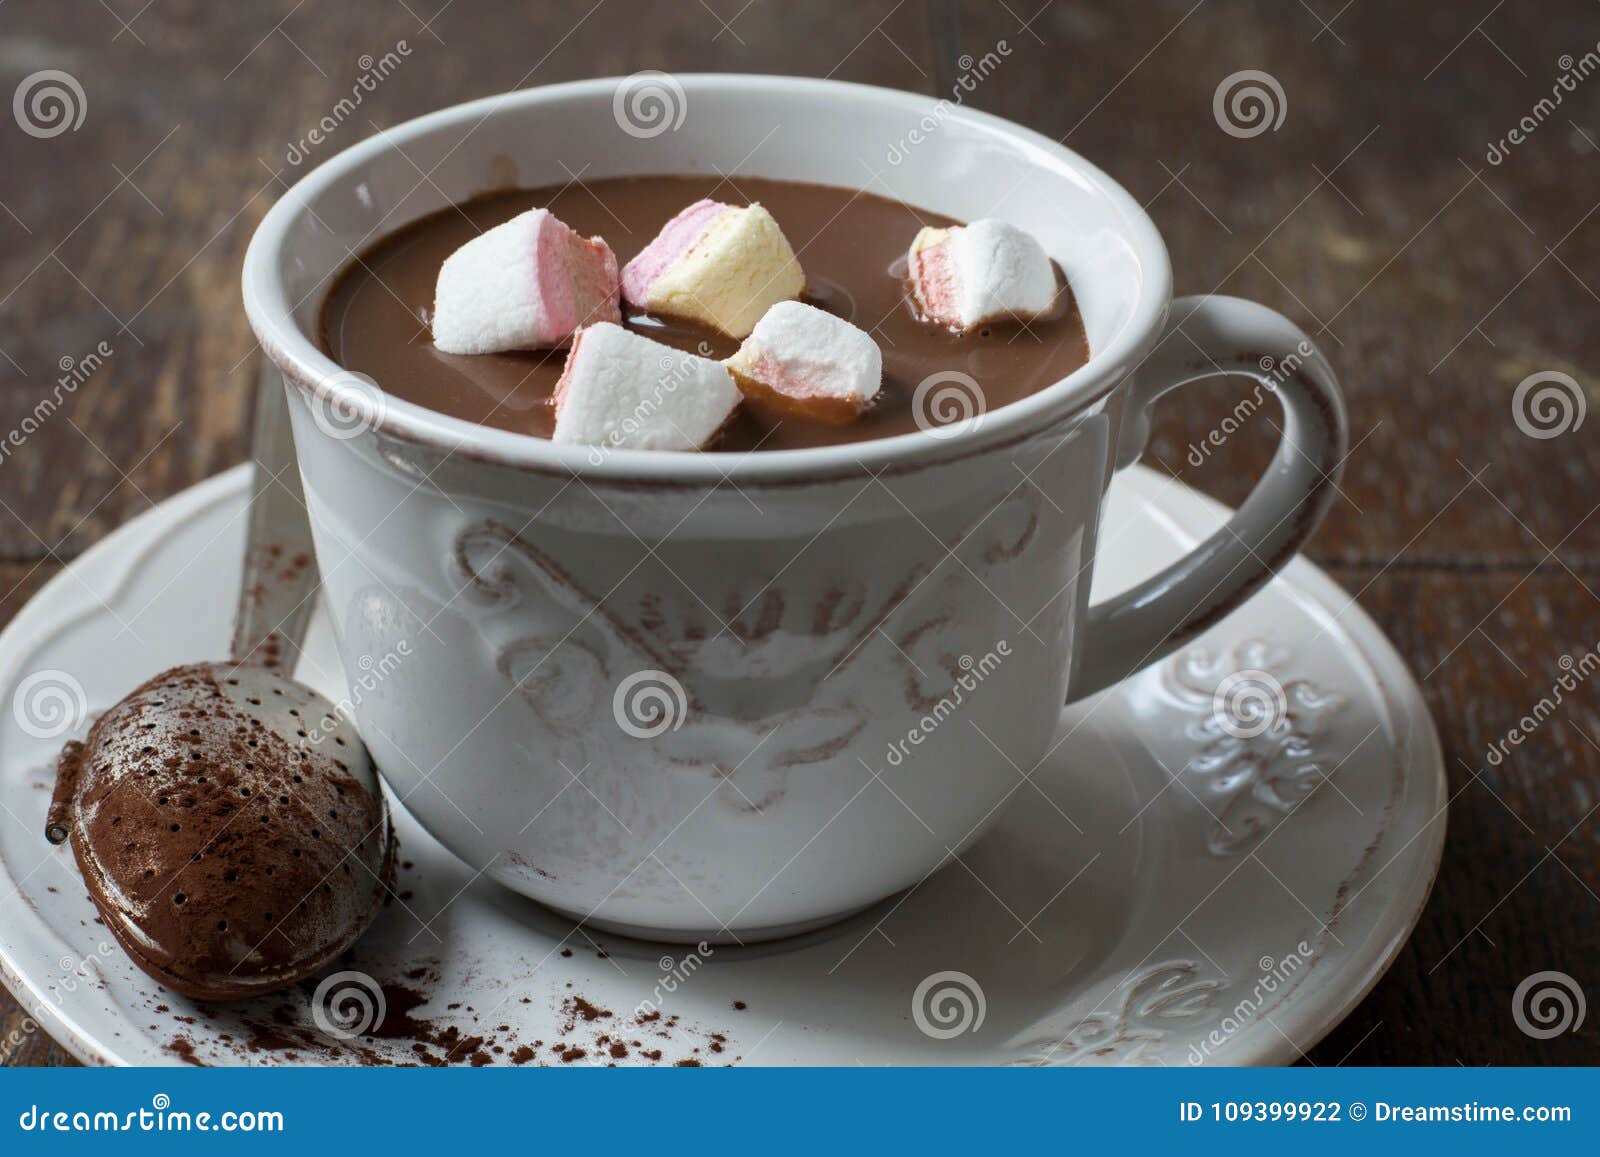 Creamy Hot Cocoa and Marshmallows Stock Photo - Image of detail ...